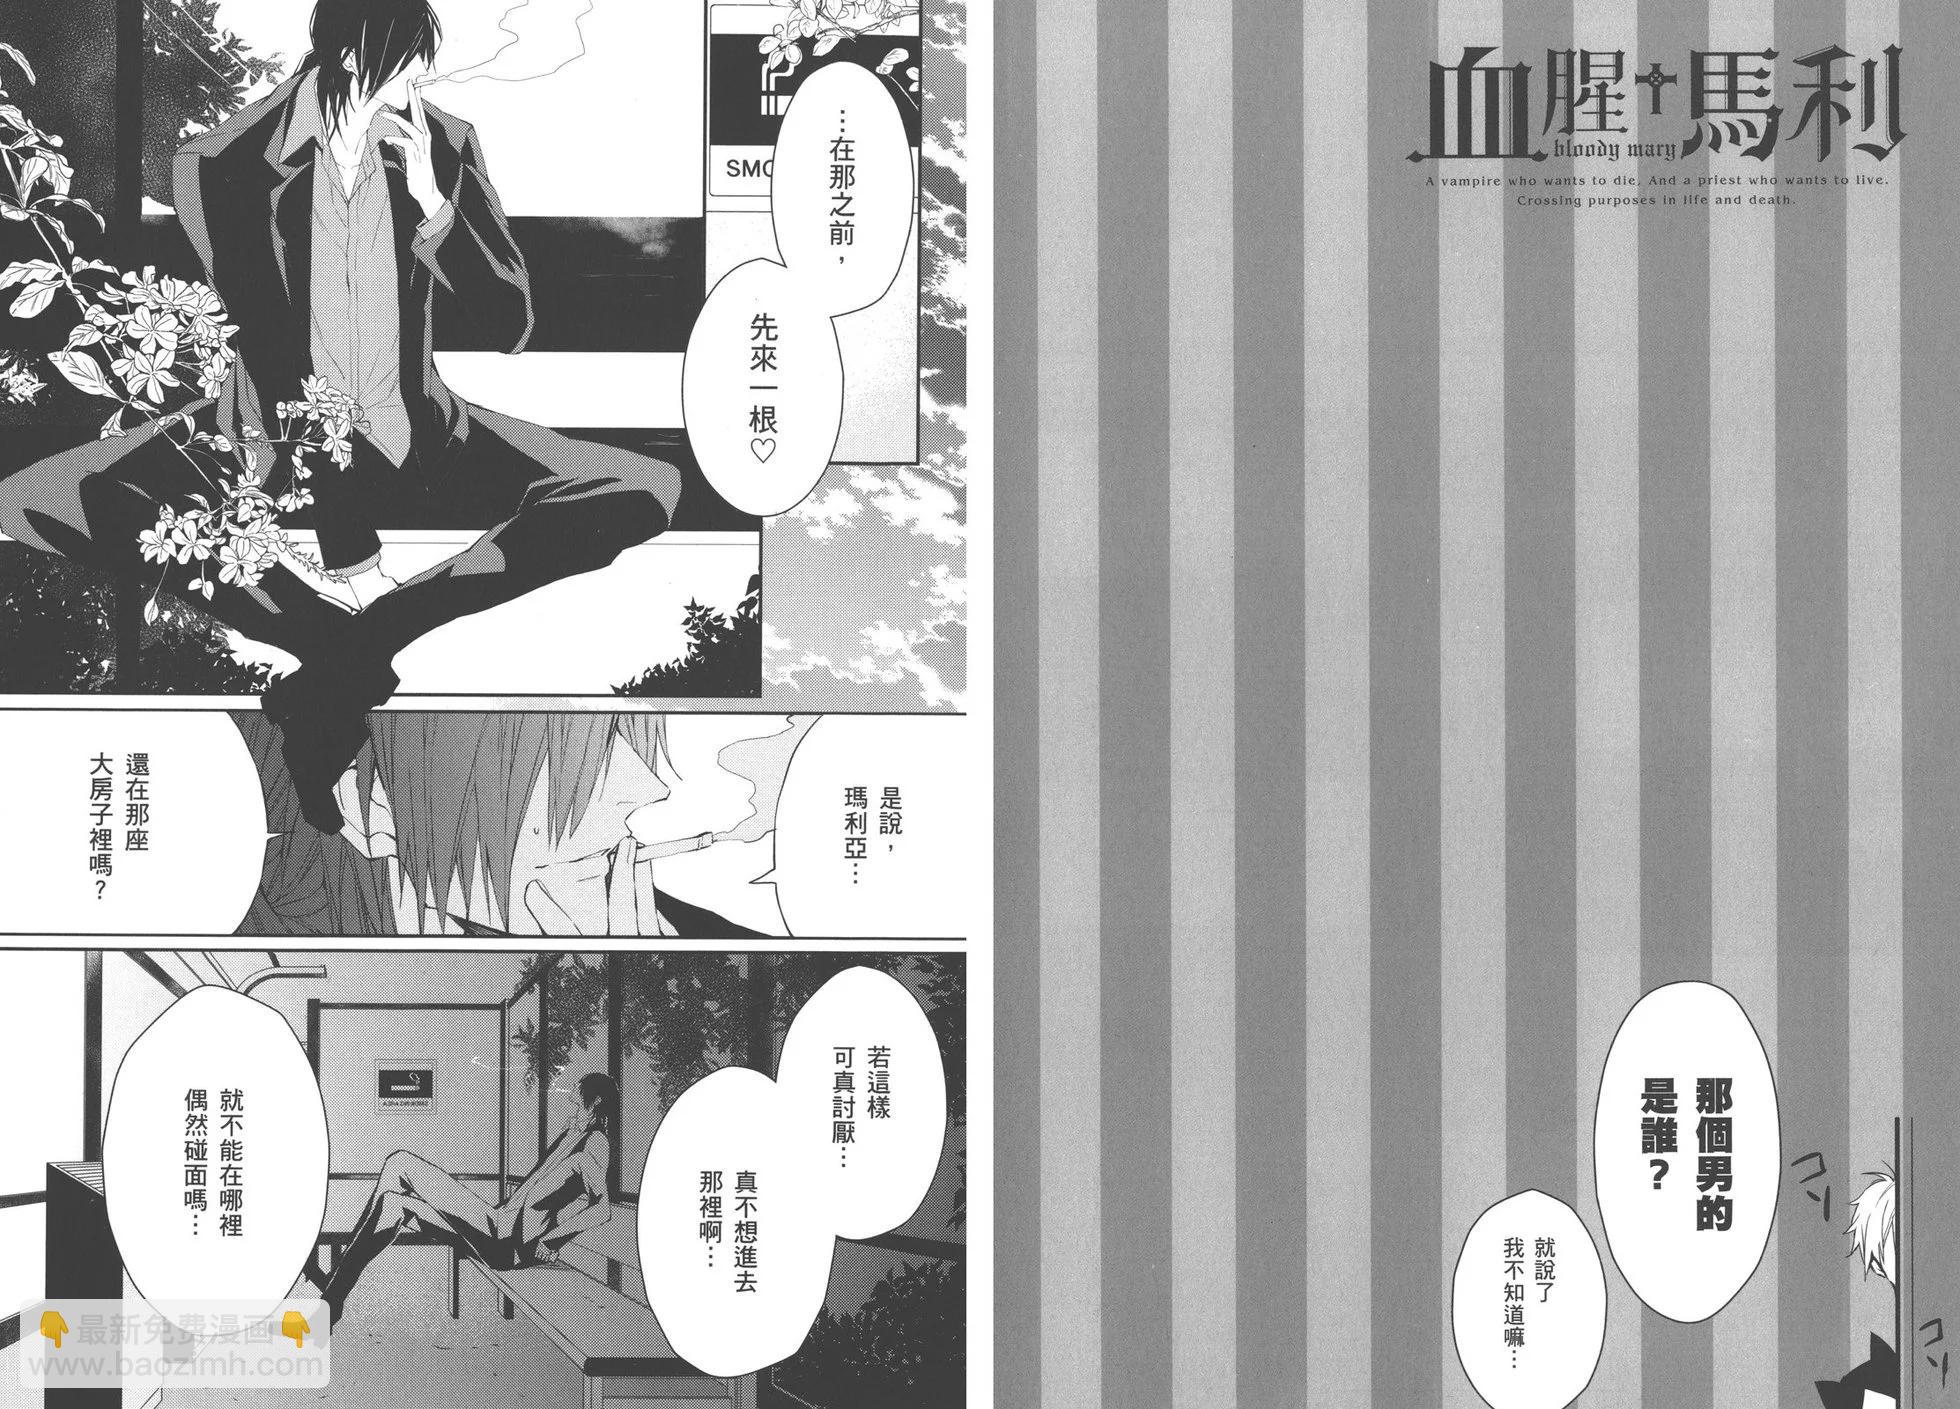 Bloody Mary - 第04卷(1/2) - 7